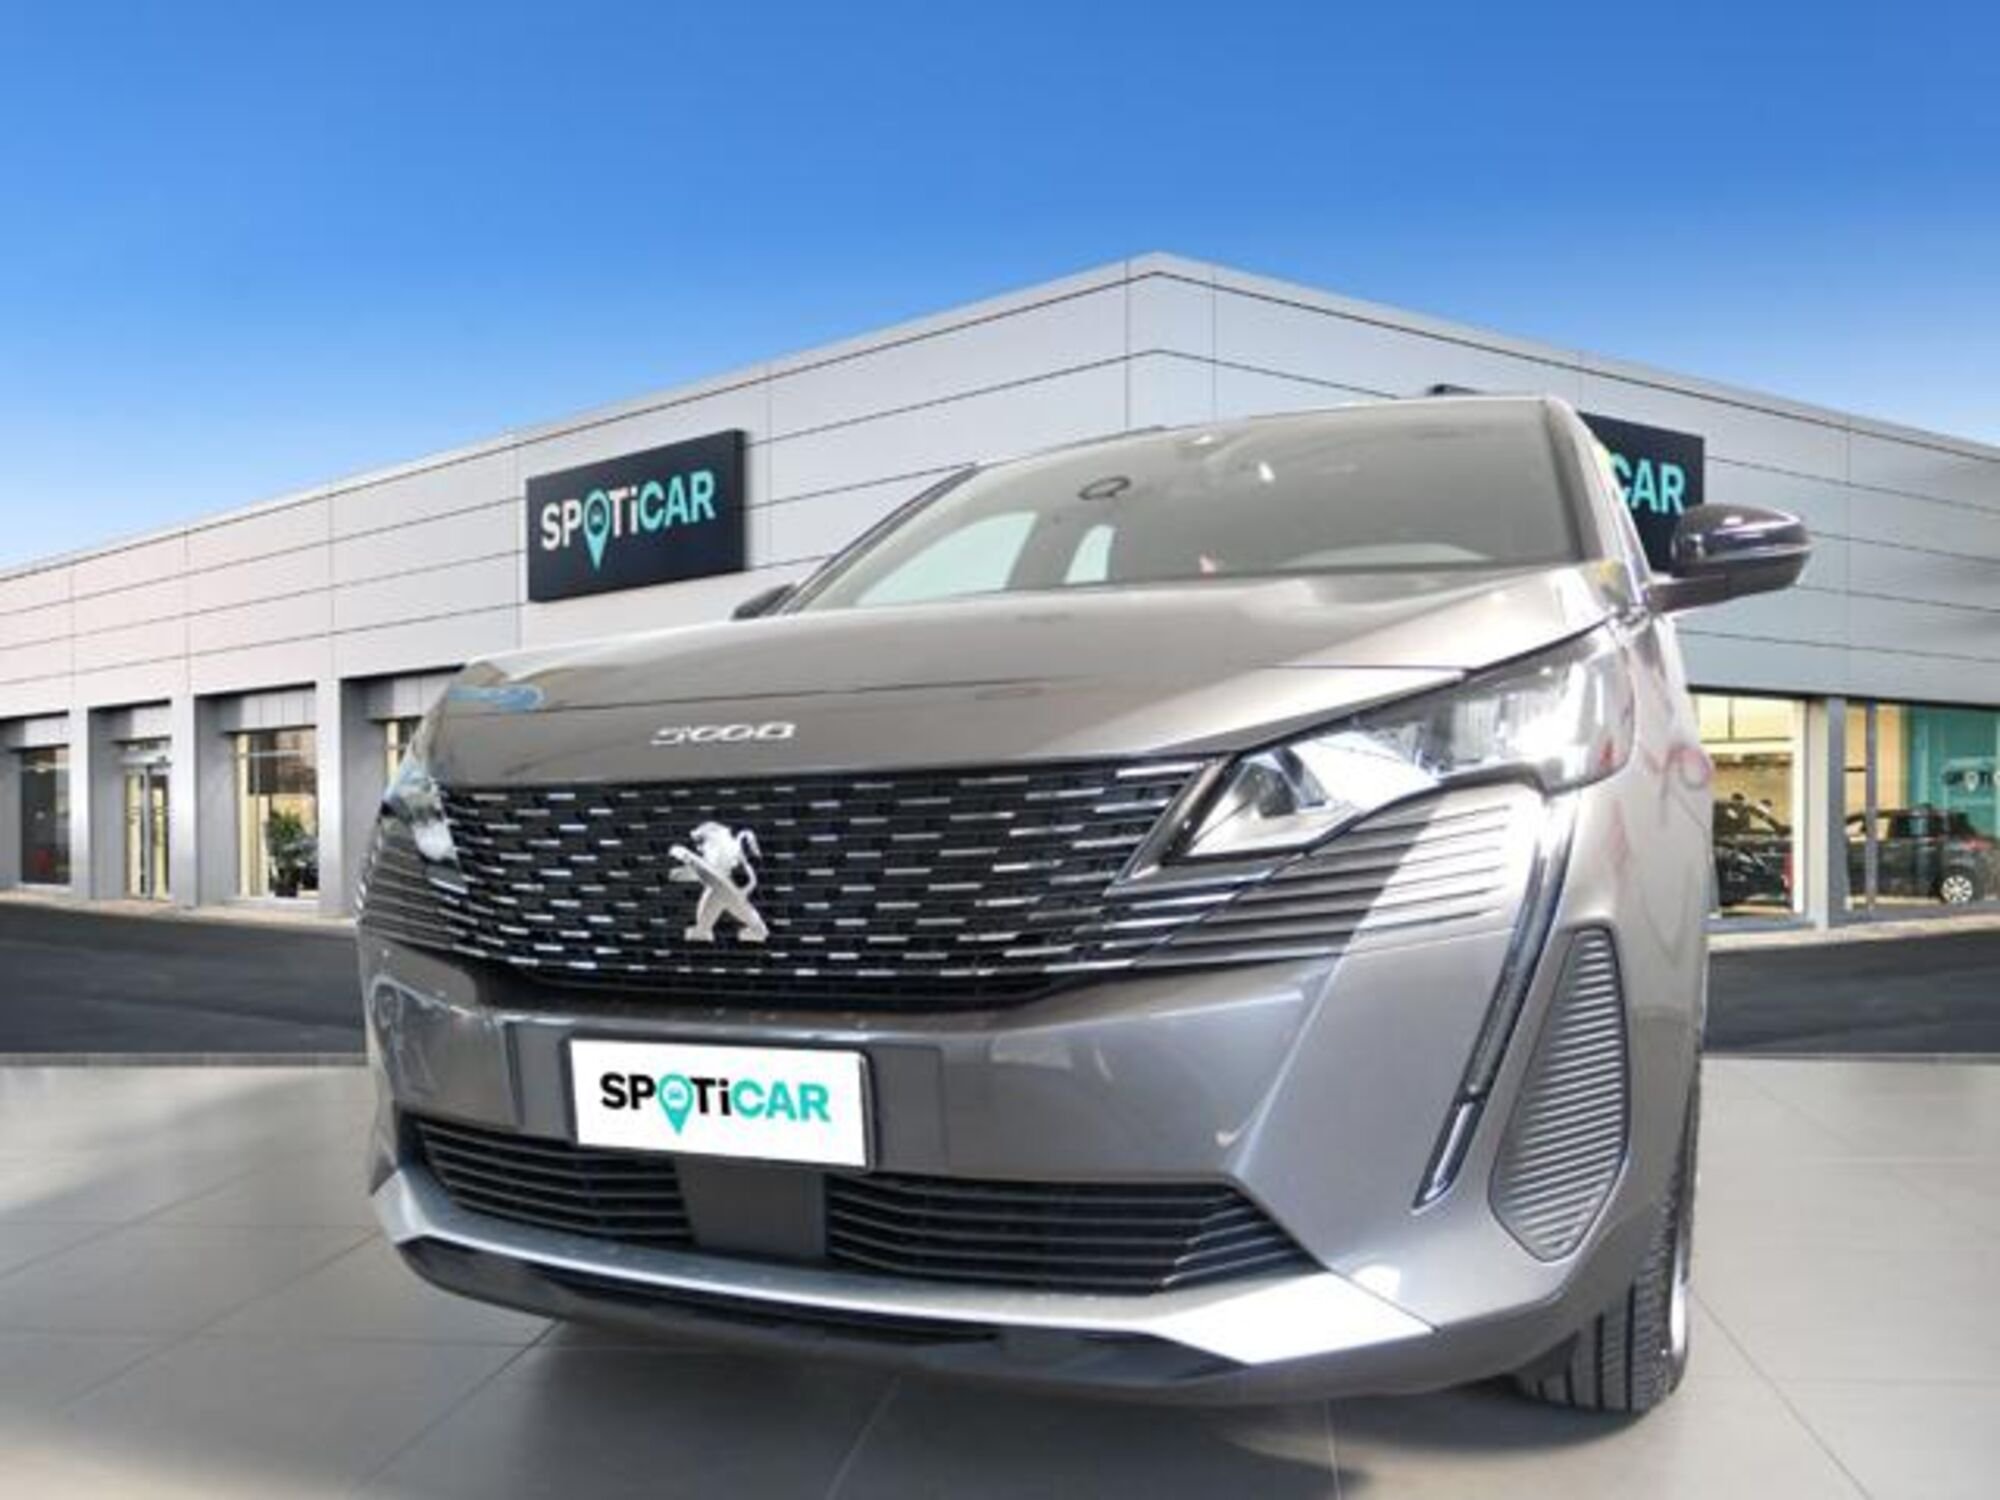 Peugeot 5008 PureTech Turbo 130 S&S Active Pack nuovo